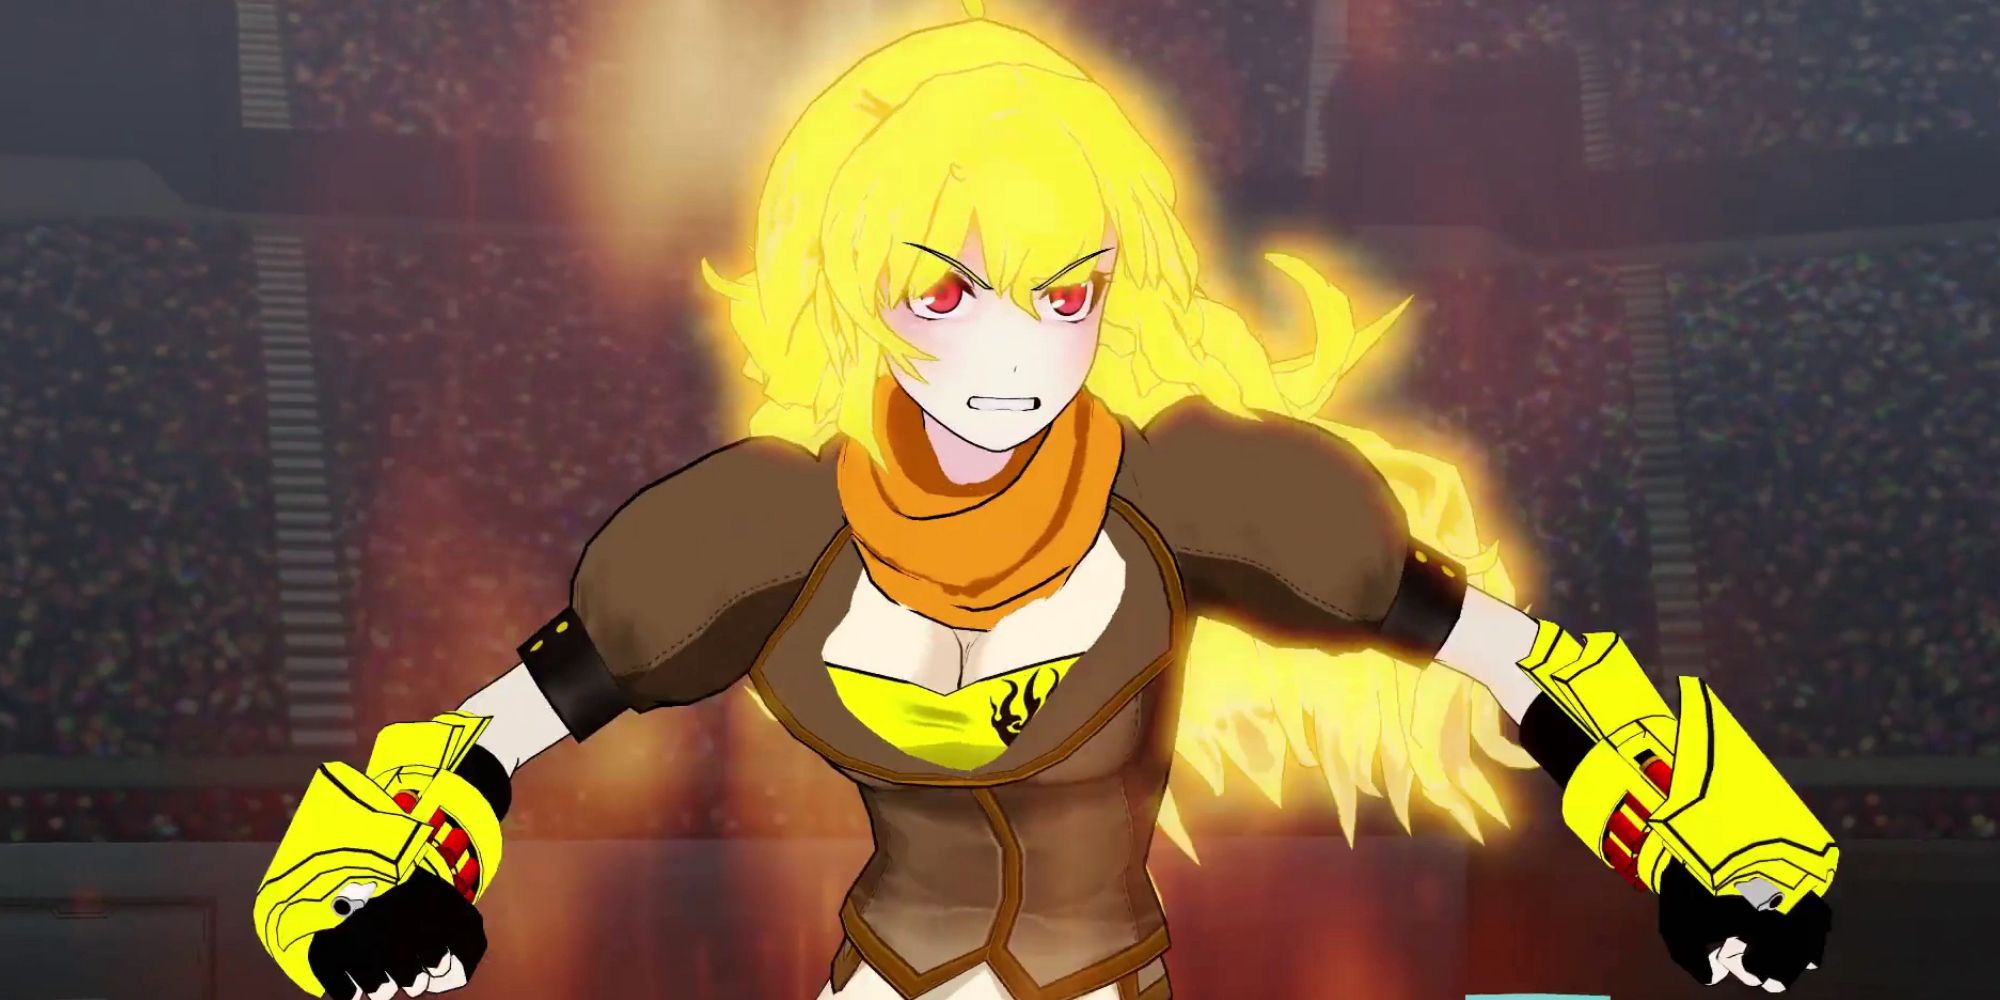 Yang Xiao Long Has Fiery Hair When Her Semblance Activates